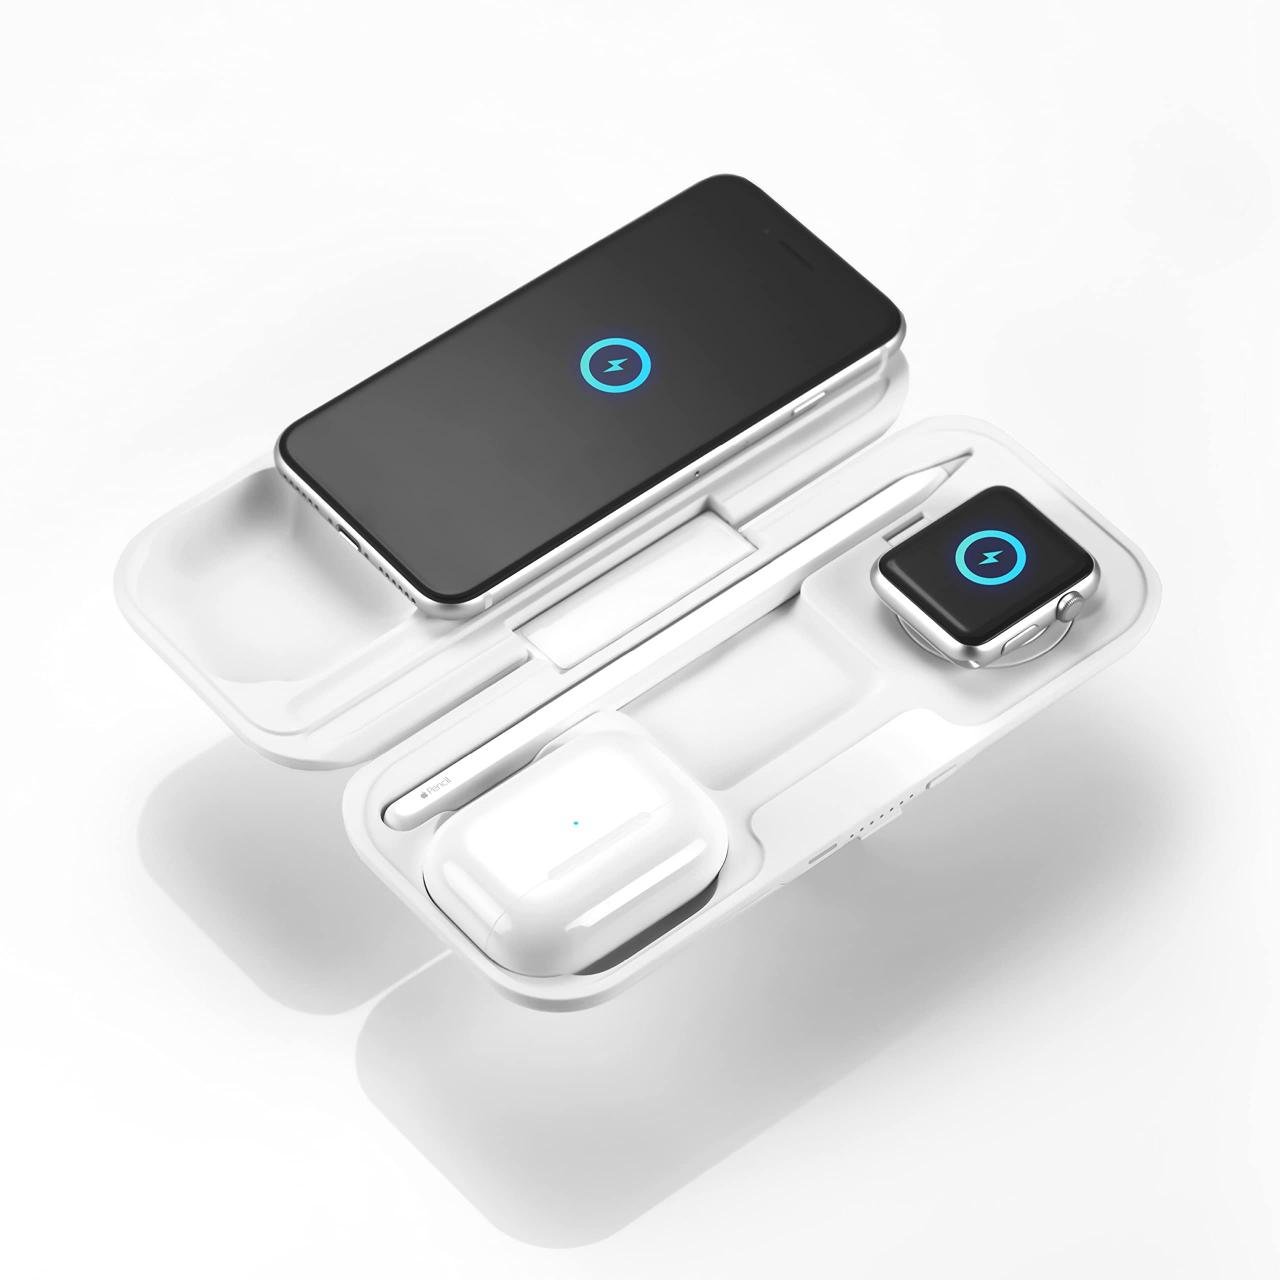 Momax Airbox Multi-Device Wireless Charging Power Bank